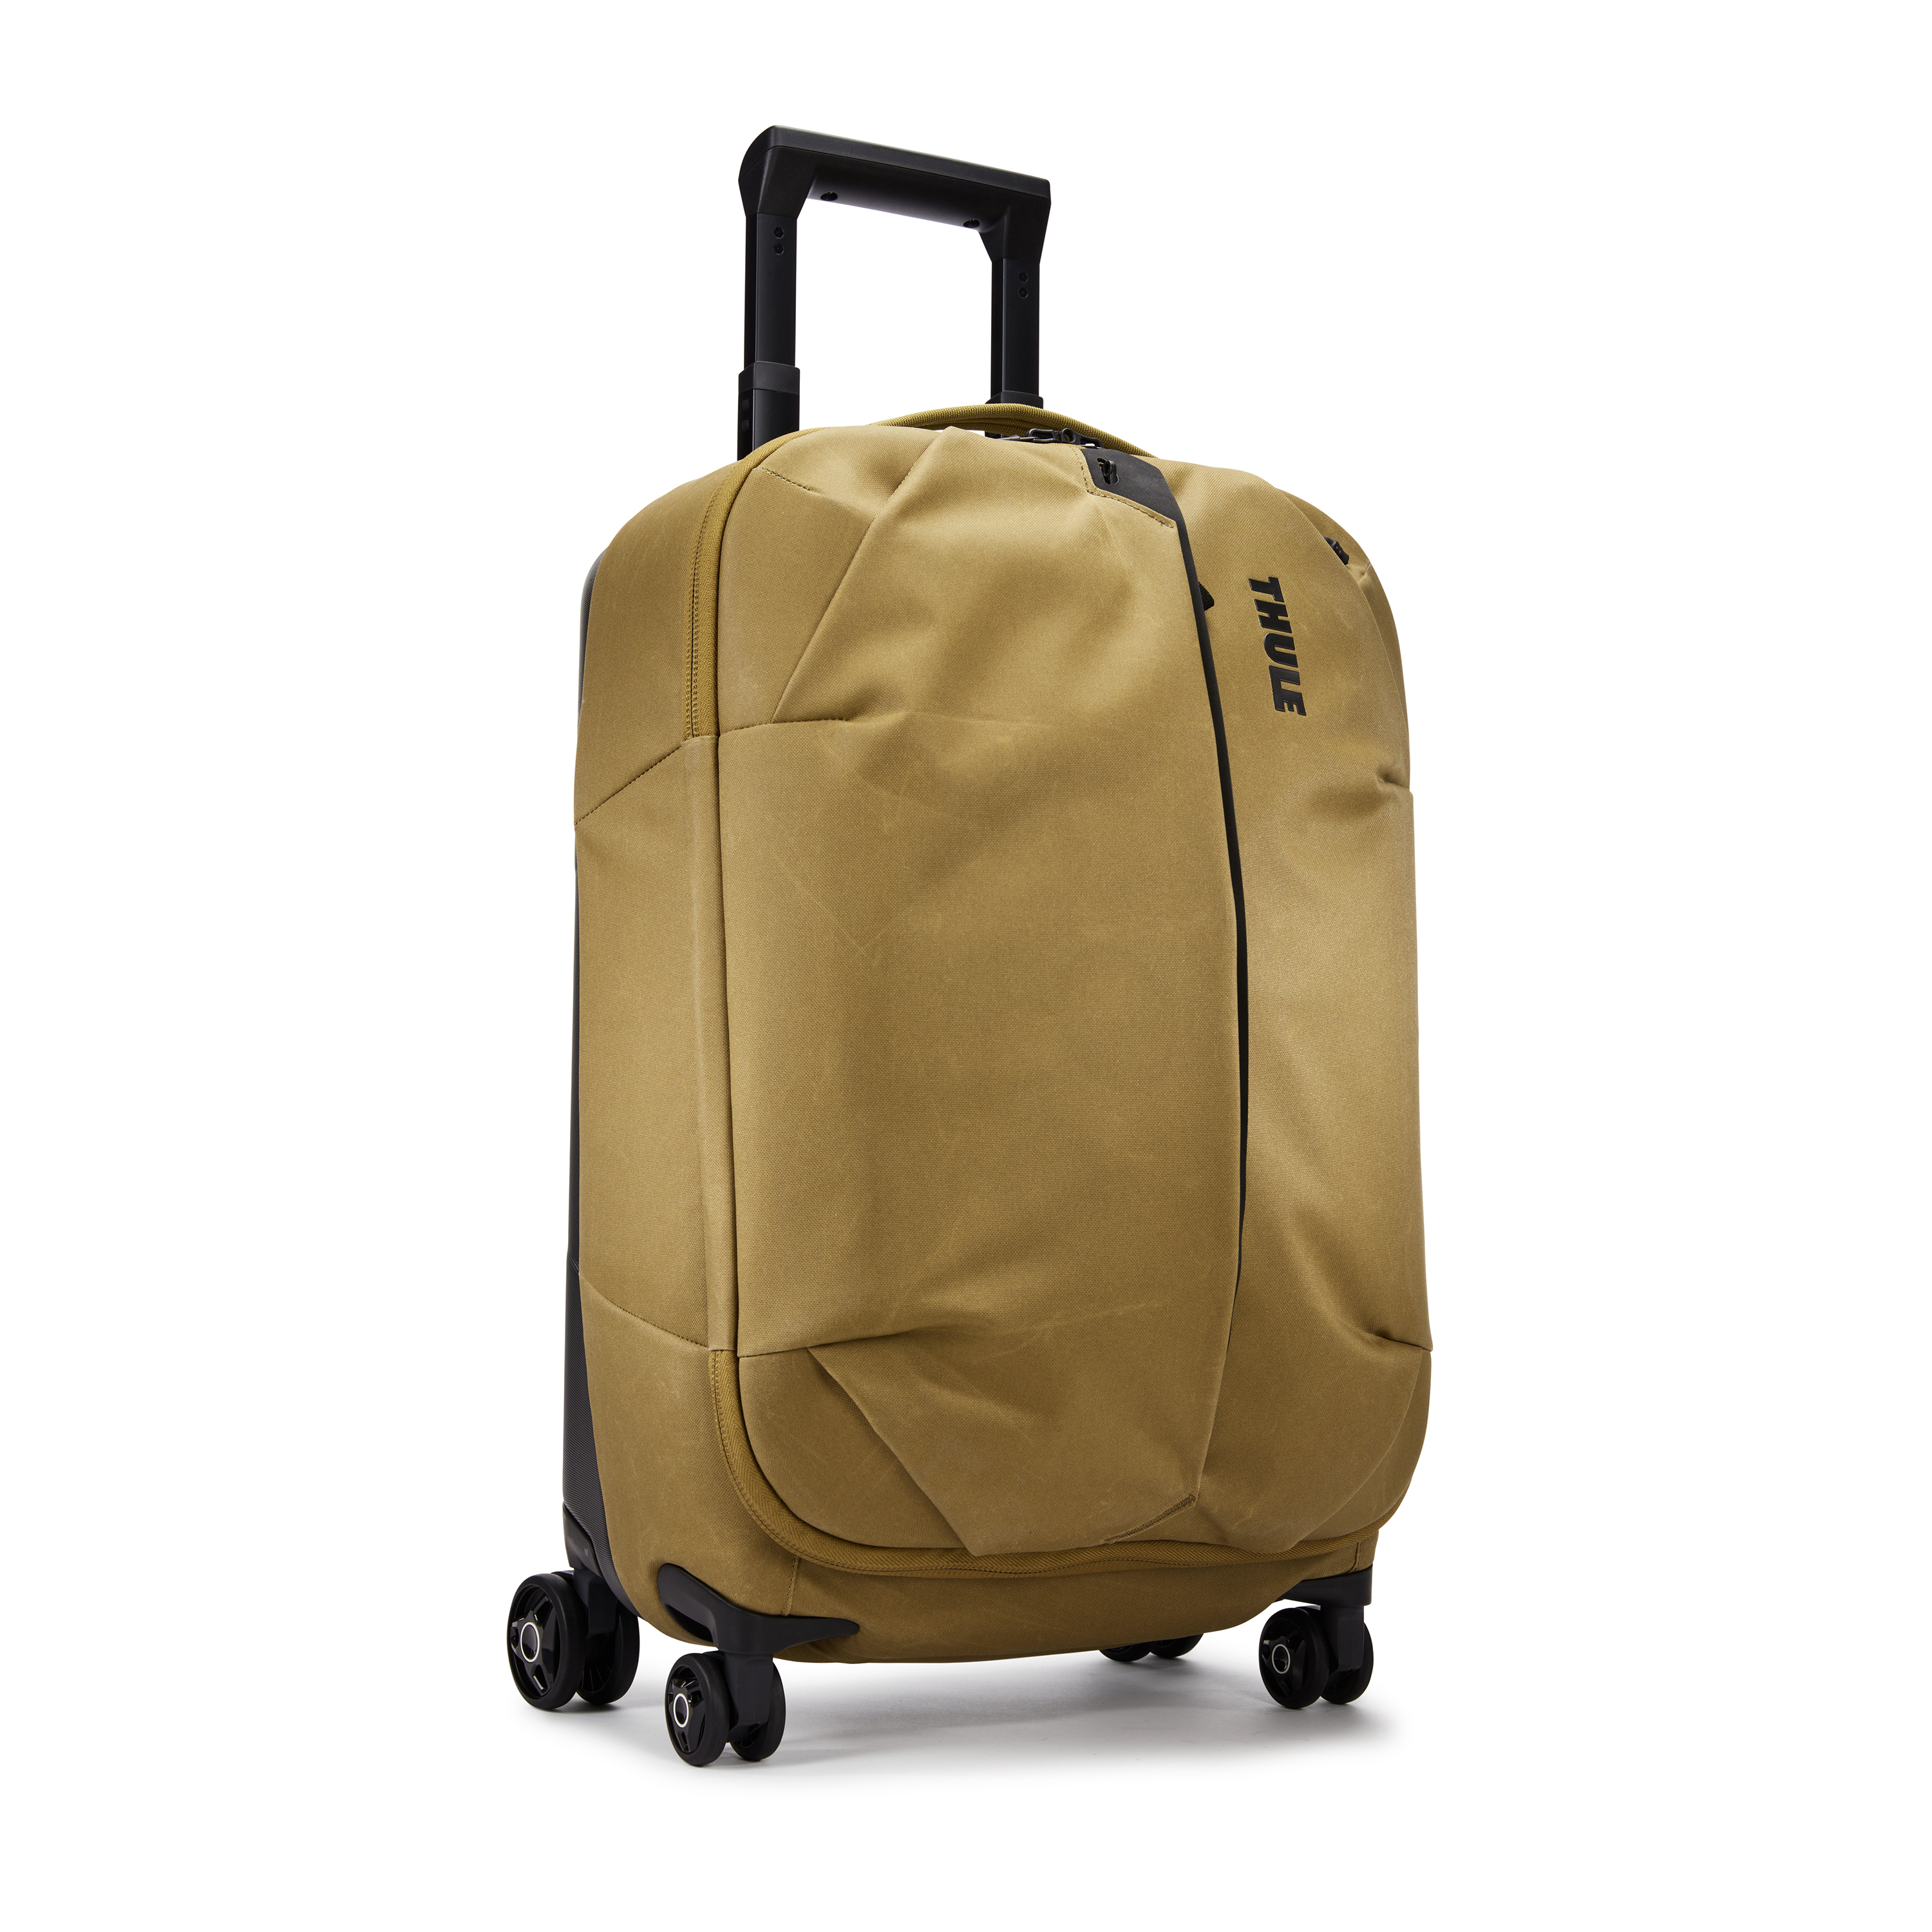 Thule Aion Carry On Spinner Suitcase 35L